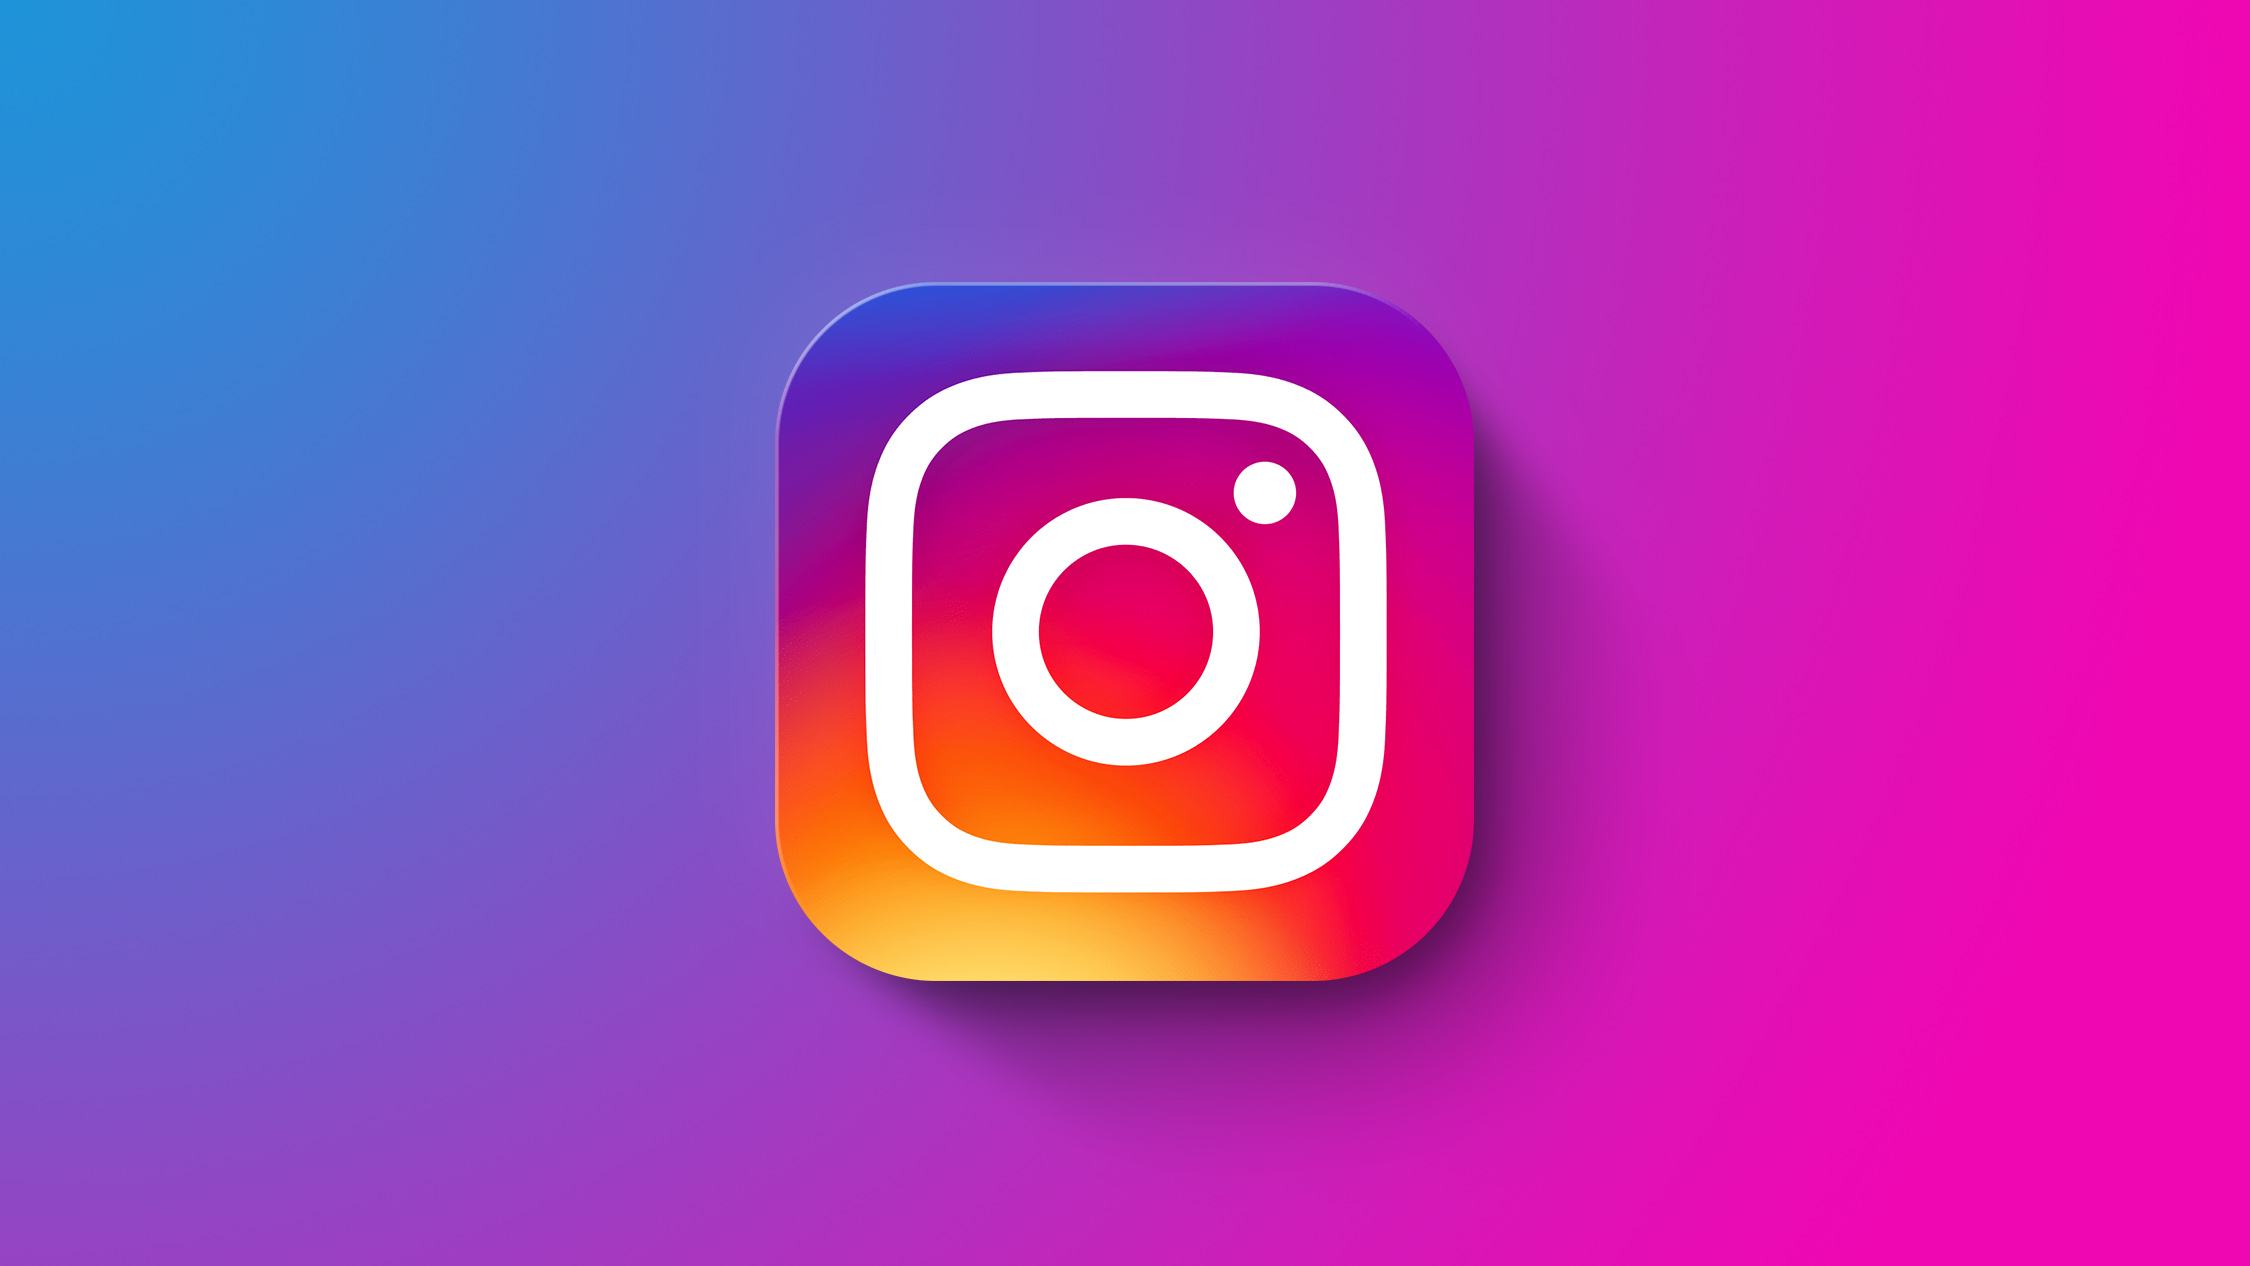 Some Instagram Users Report Problems Accessing Accounts